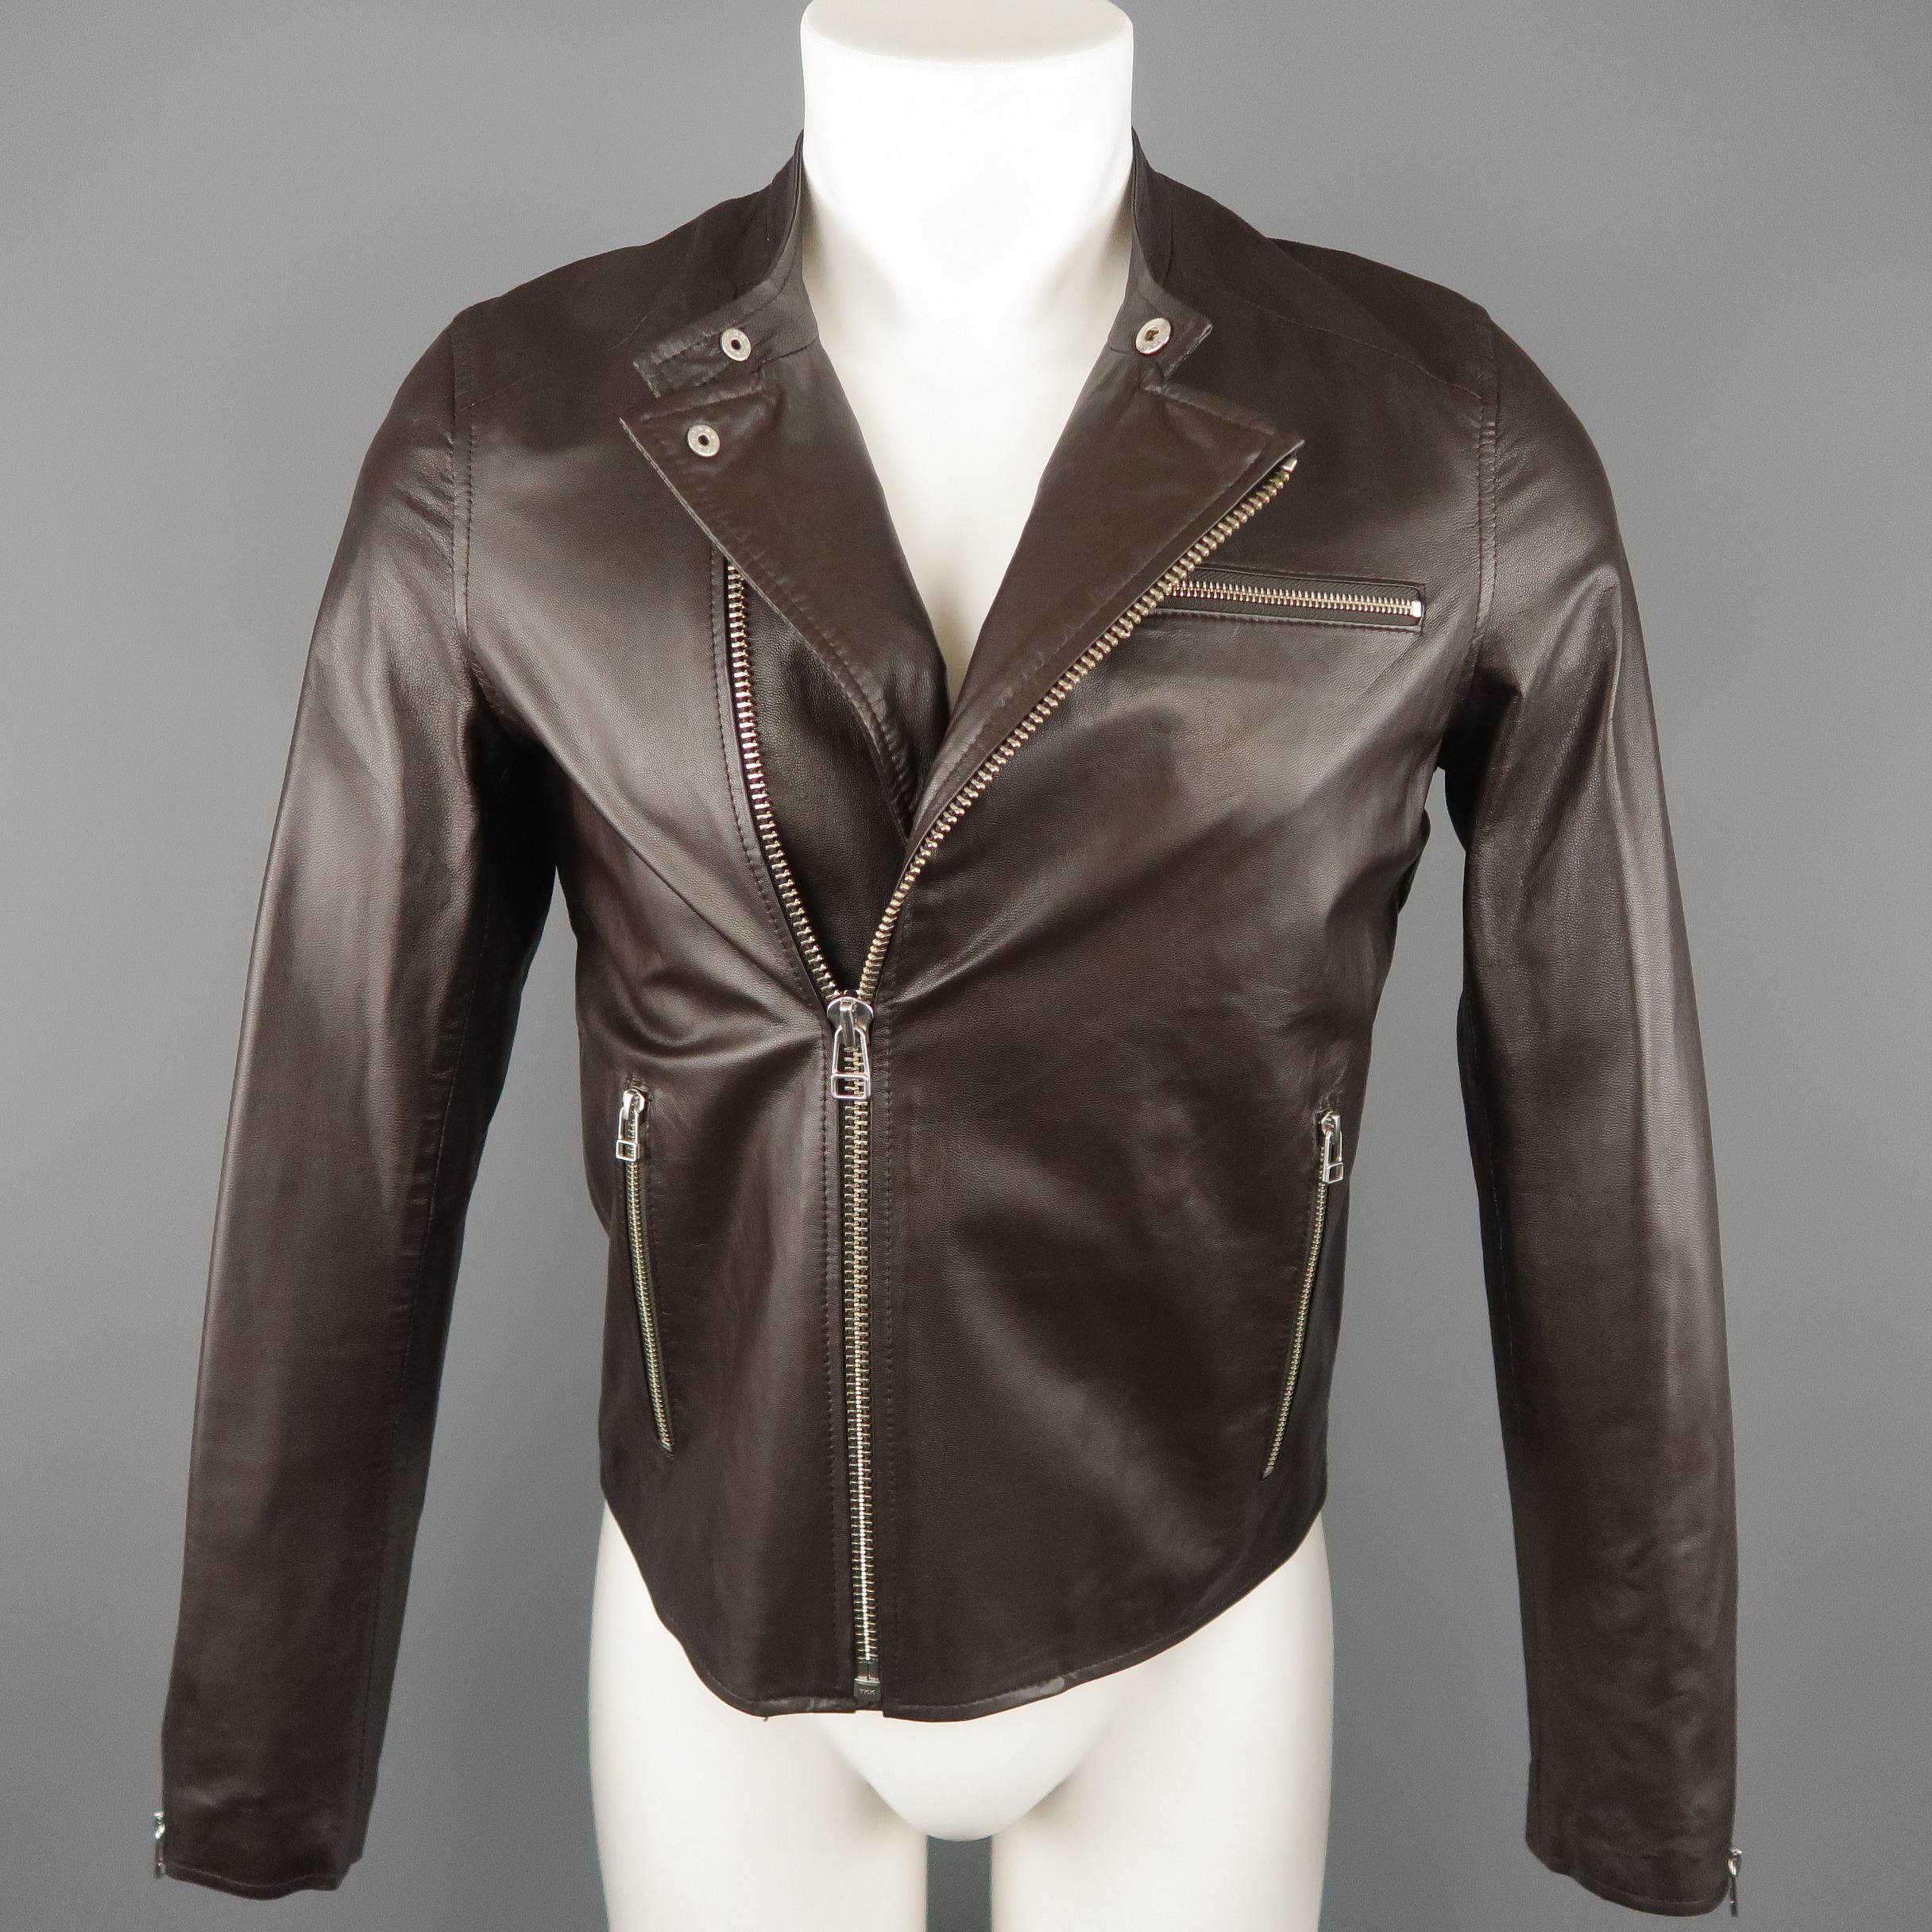 SHIPLEY & HALMOS motorcycle jacket comes in soft brown leather with a band snap collar, asymmetrical zip, zip cuffs, and zip pockets.
 
Excellent Pre-Owned Condition.
Marked: S
 
Measurements:
 
Shoulder: 16 in.
Chest: 38 in.
Sleeve: 25.5